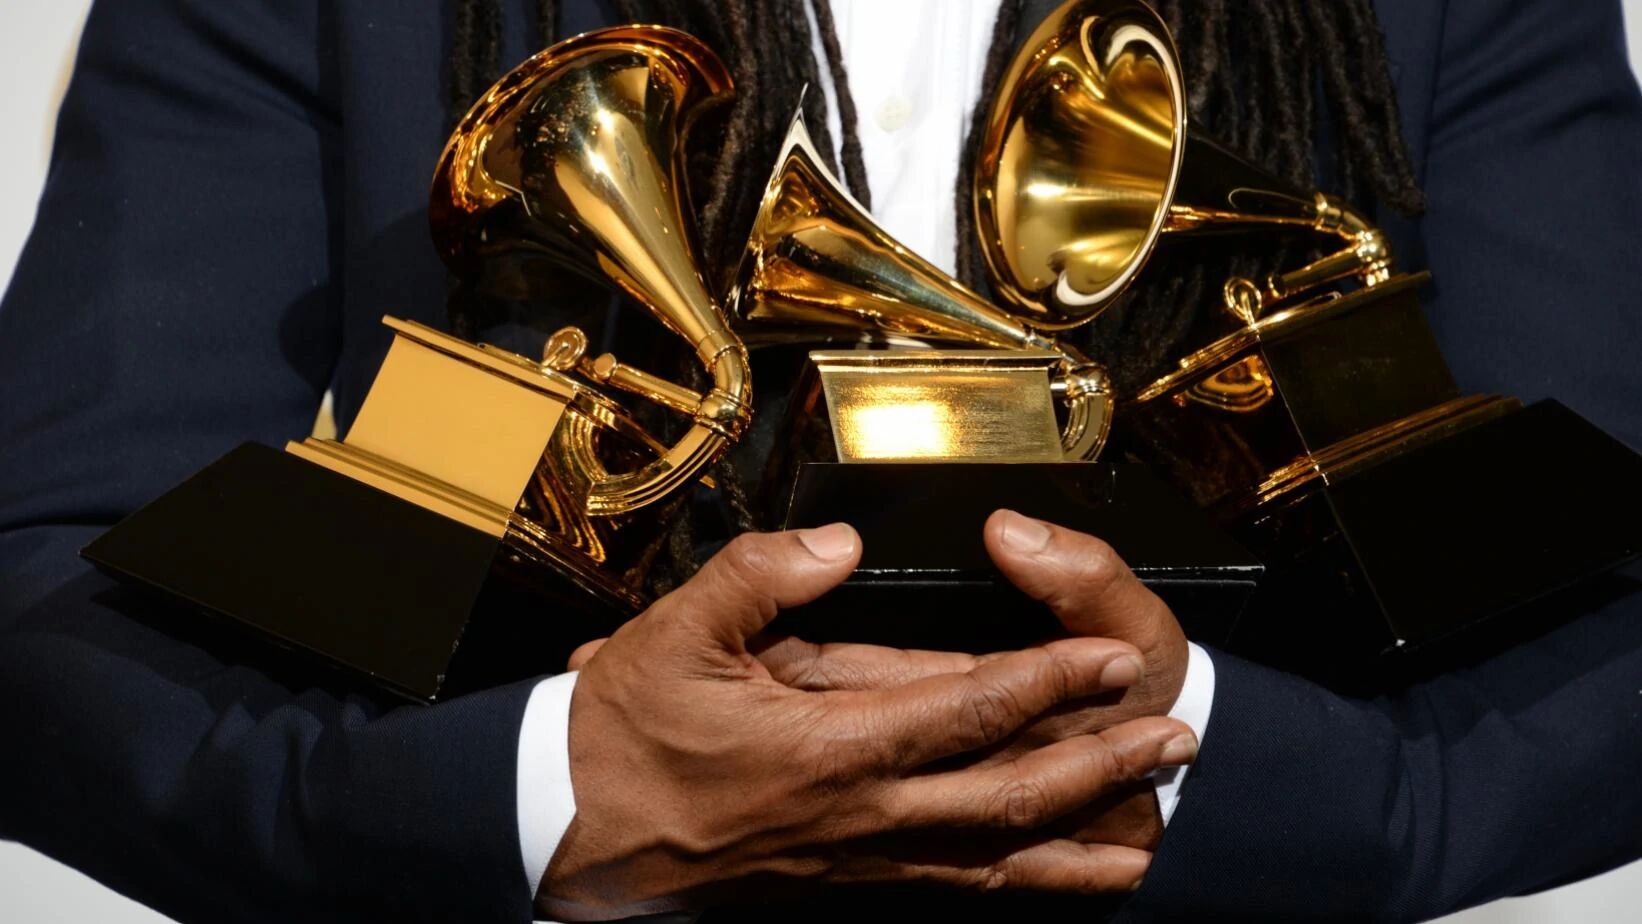 Grammy Awards 2022: When and where to watch the ceremony live